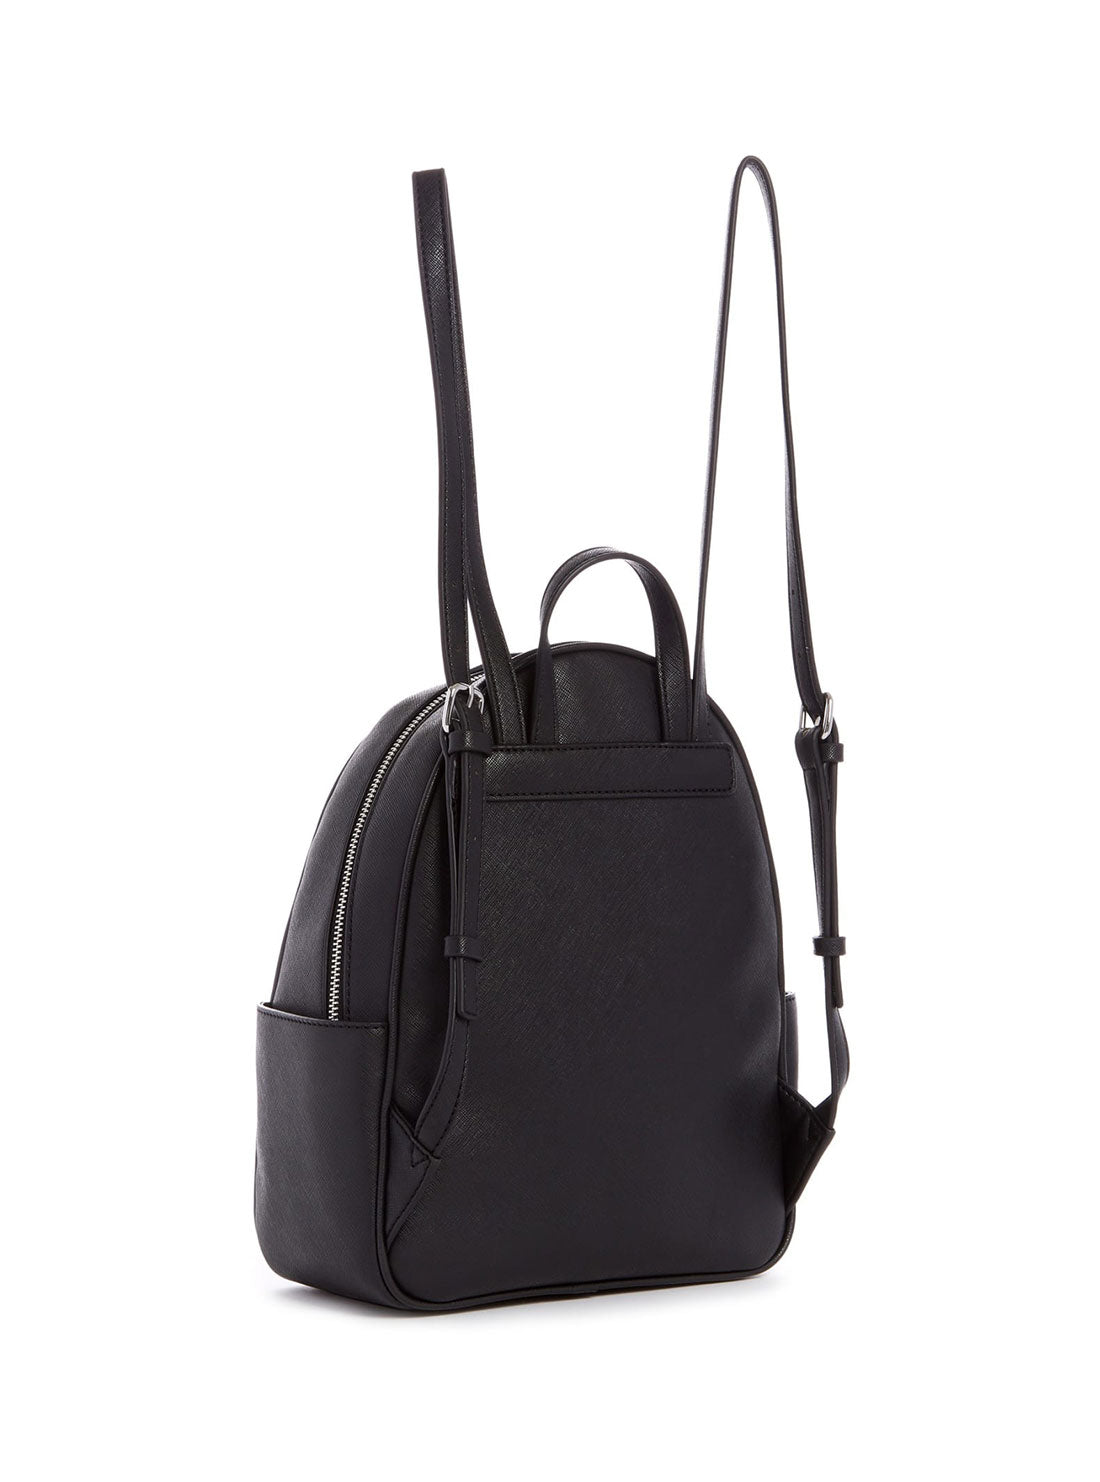 GUESS Women's Black Hastings Backpack LE771630 Back View